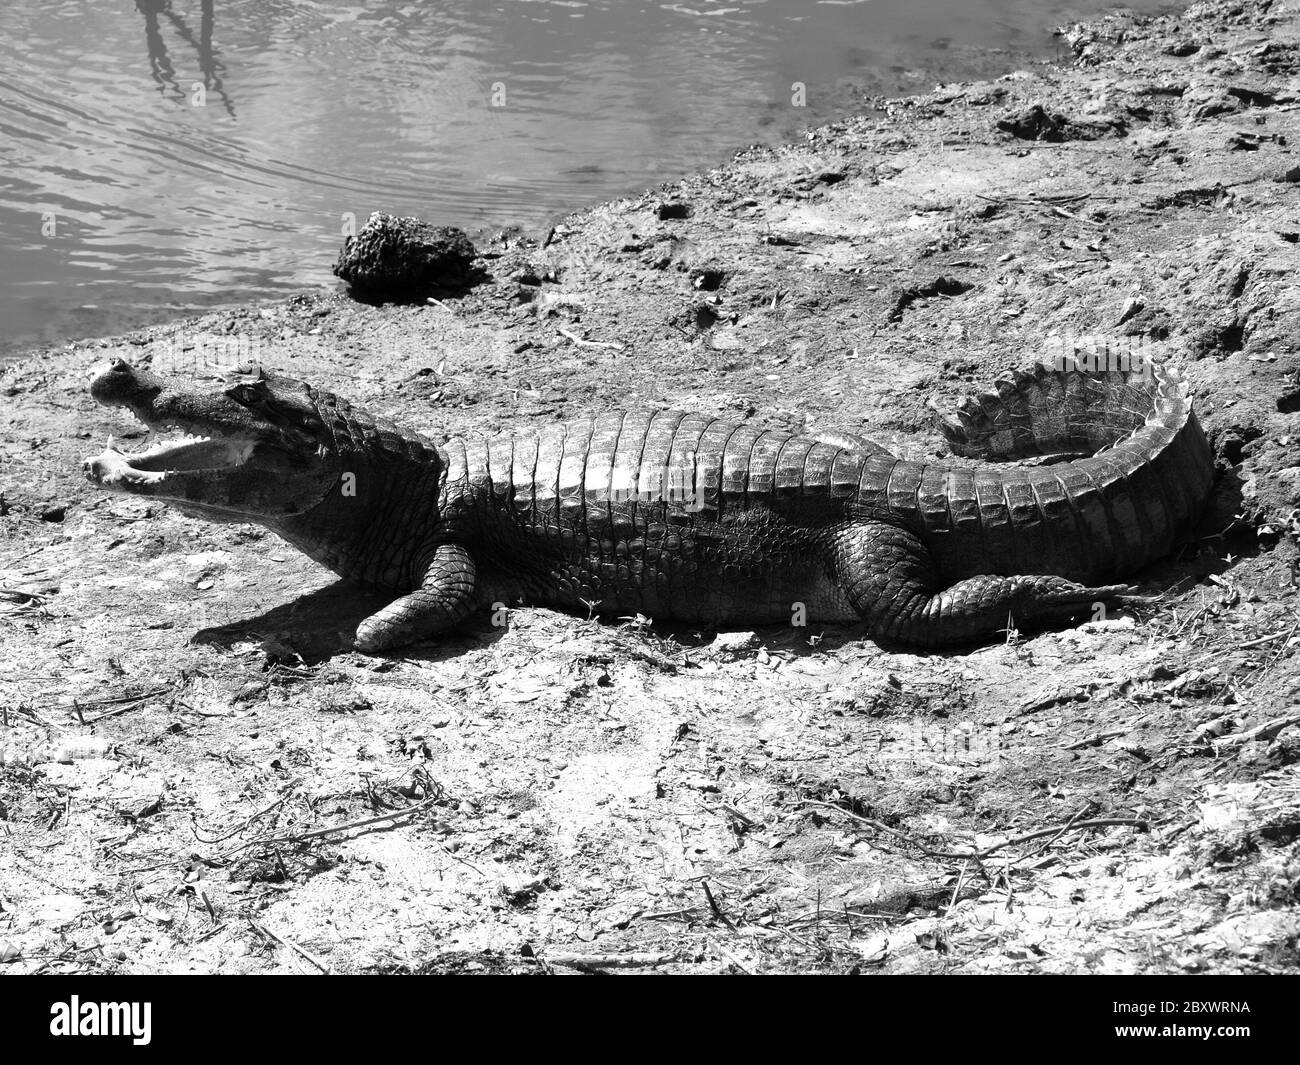 American alligator lying at river, South America. Black and white image Stock Photo